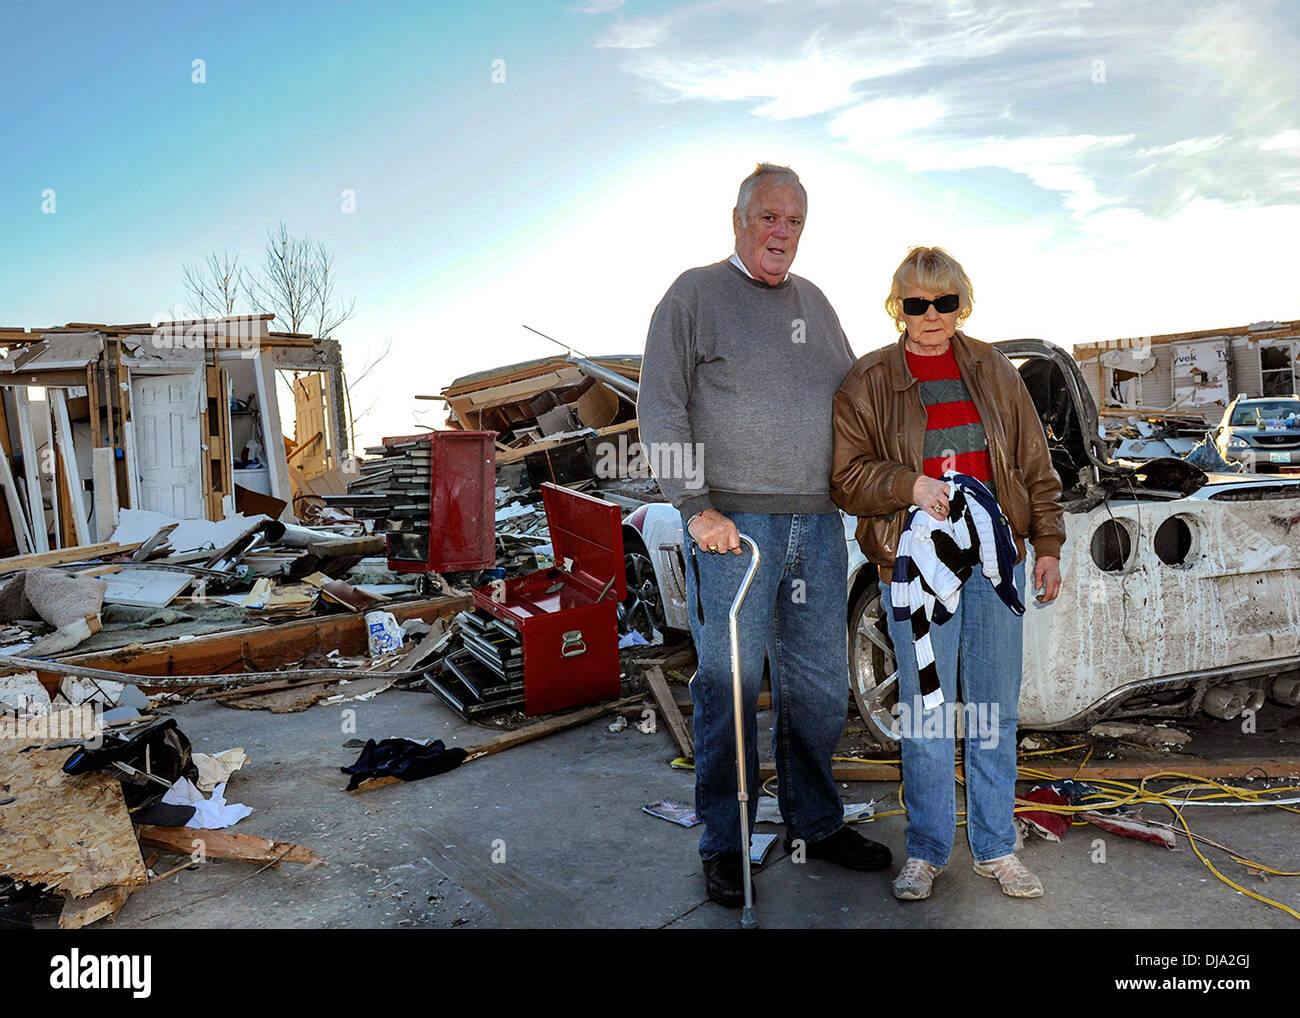 An elderly couple stands in front of their home destroyed by an EF-4 tornado November 19, 2013 in Washington, IL. The tornado left a path of destruction that stretched for more than 46 miles and damaged fourteen-hundred homes. Stock Photo